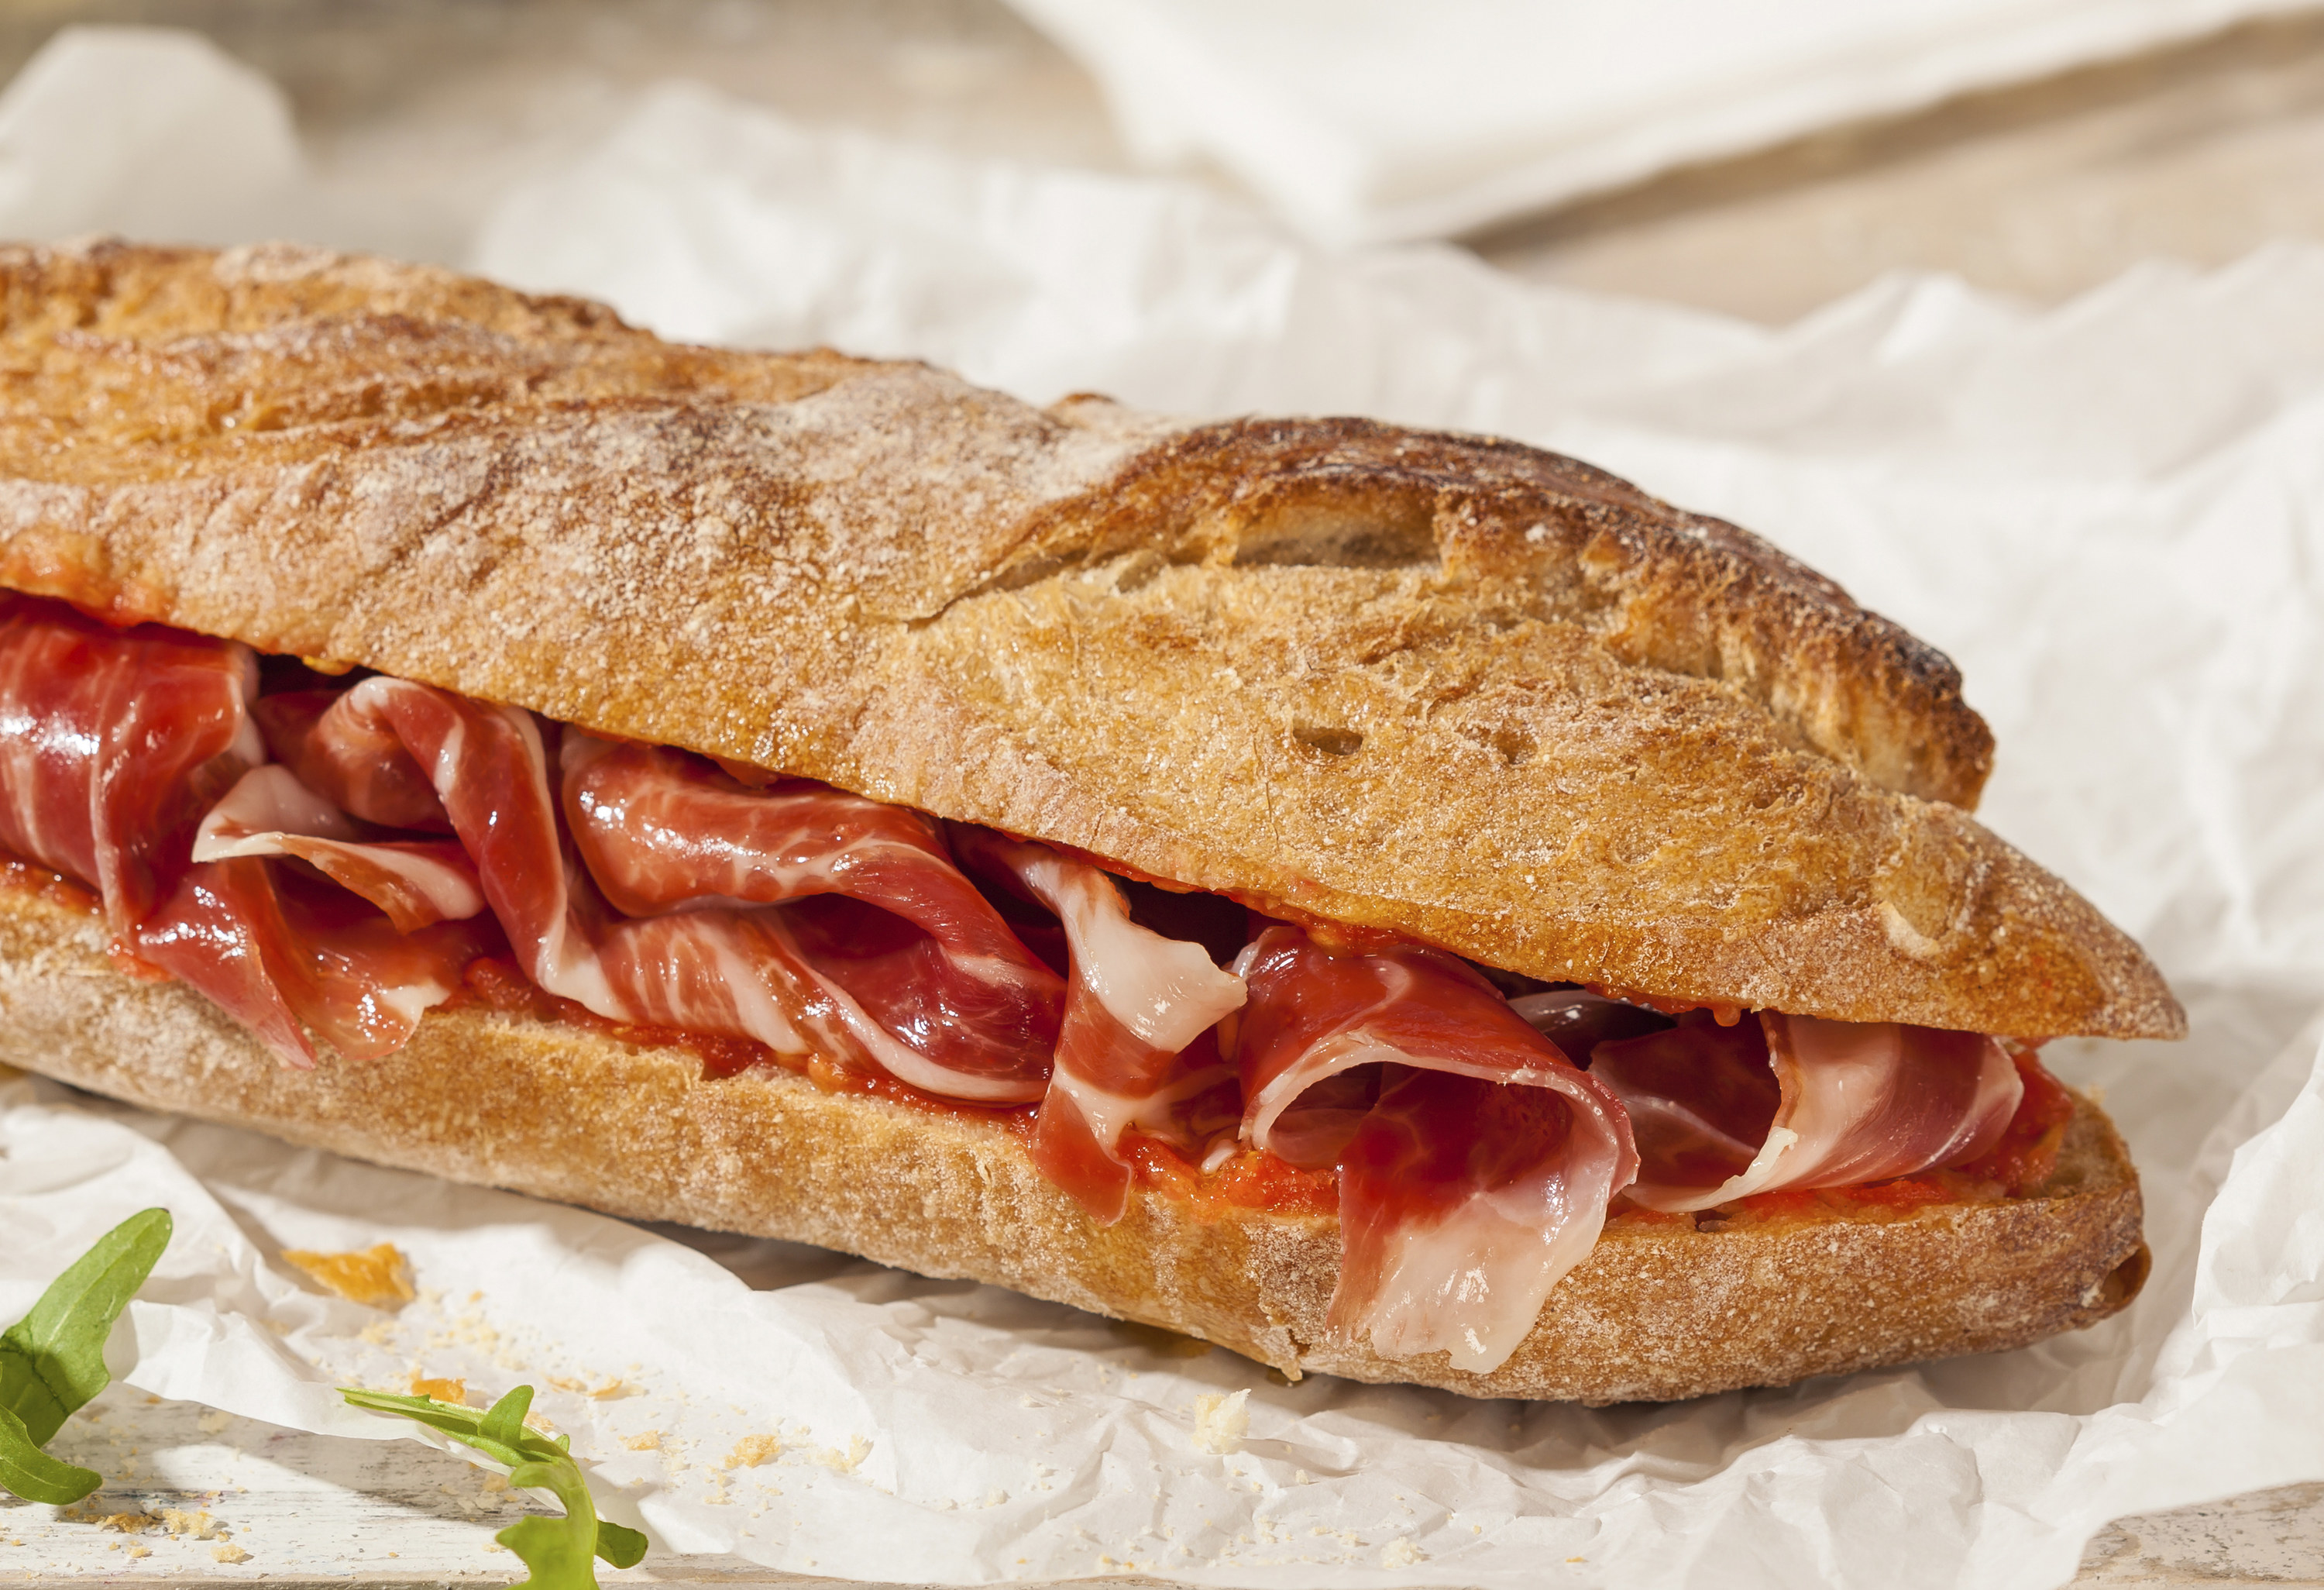 crusty baguette filled with generous amounts of thinly sliced jamon (ham)